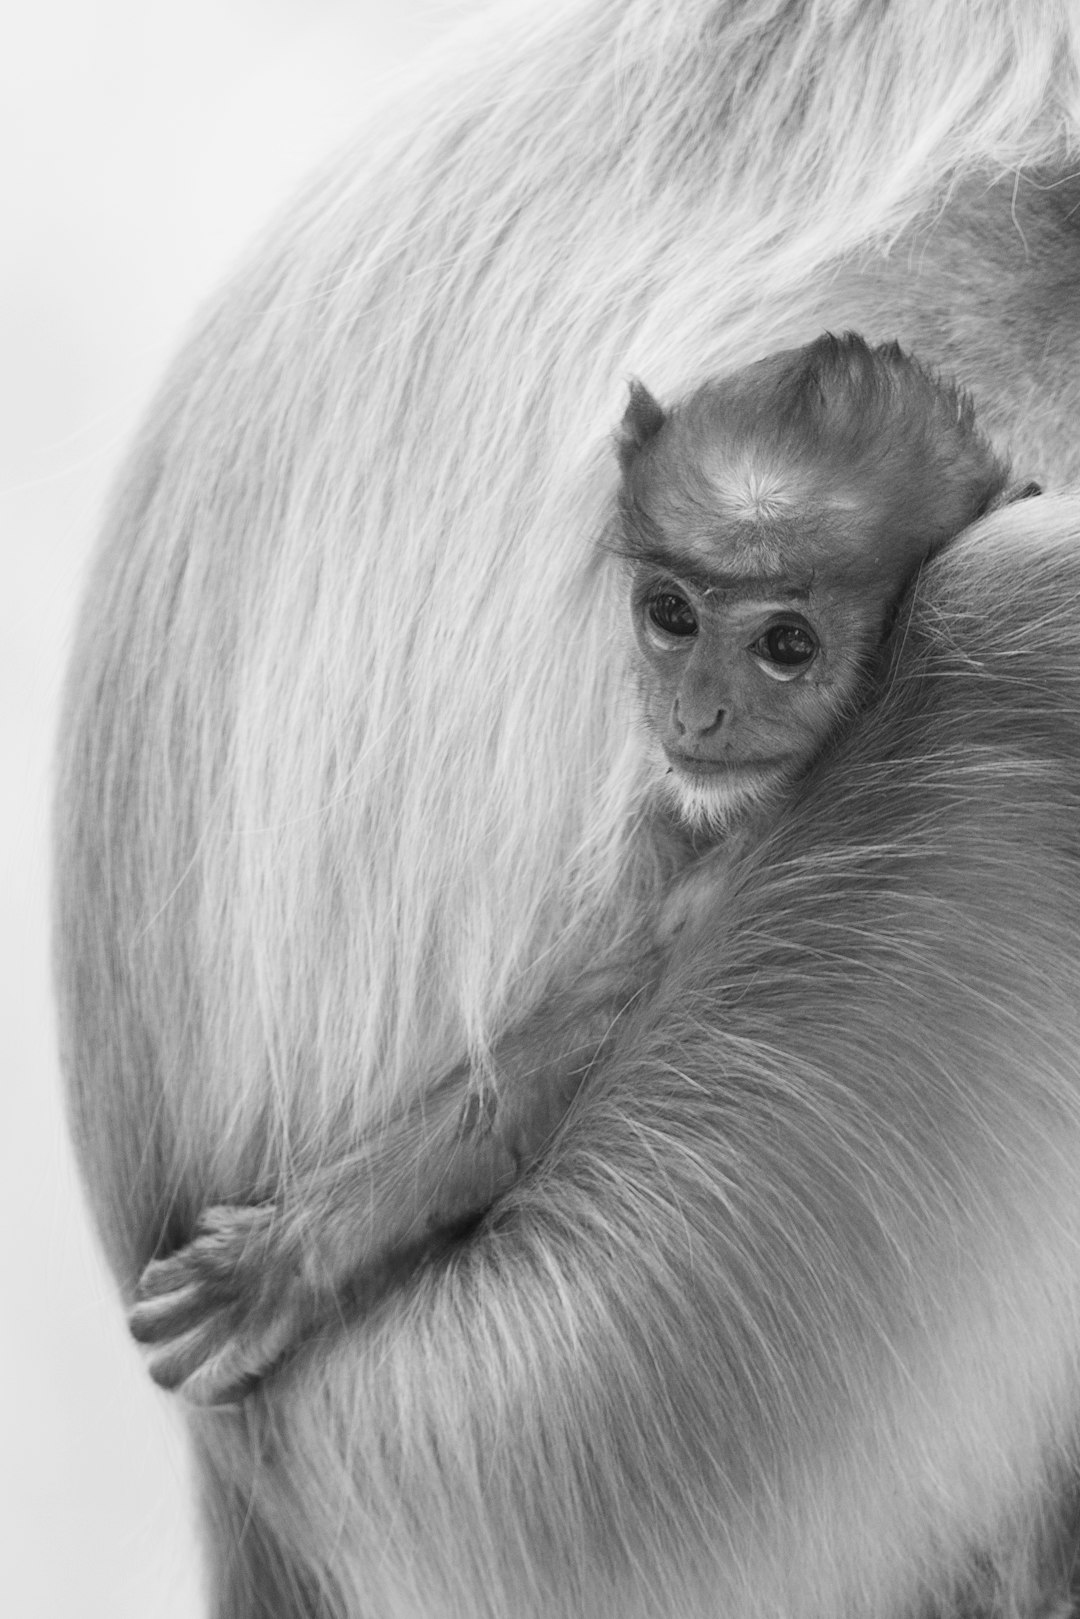 black and white photograph of baby monkey riding on the back, furry body of his mother, white background, macro photography, high resolution, award winning photo, national geographic photography, canon eos mark IV –ar 85:128